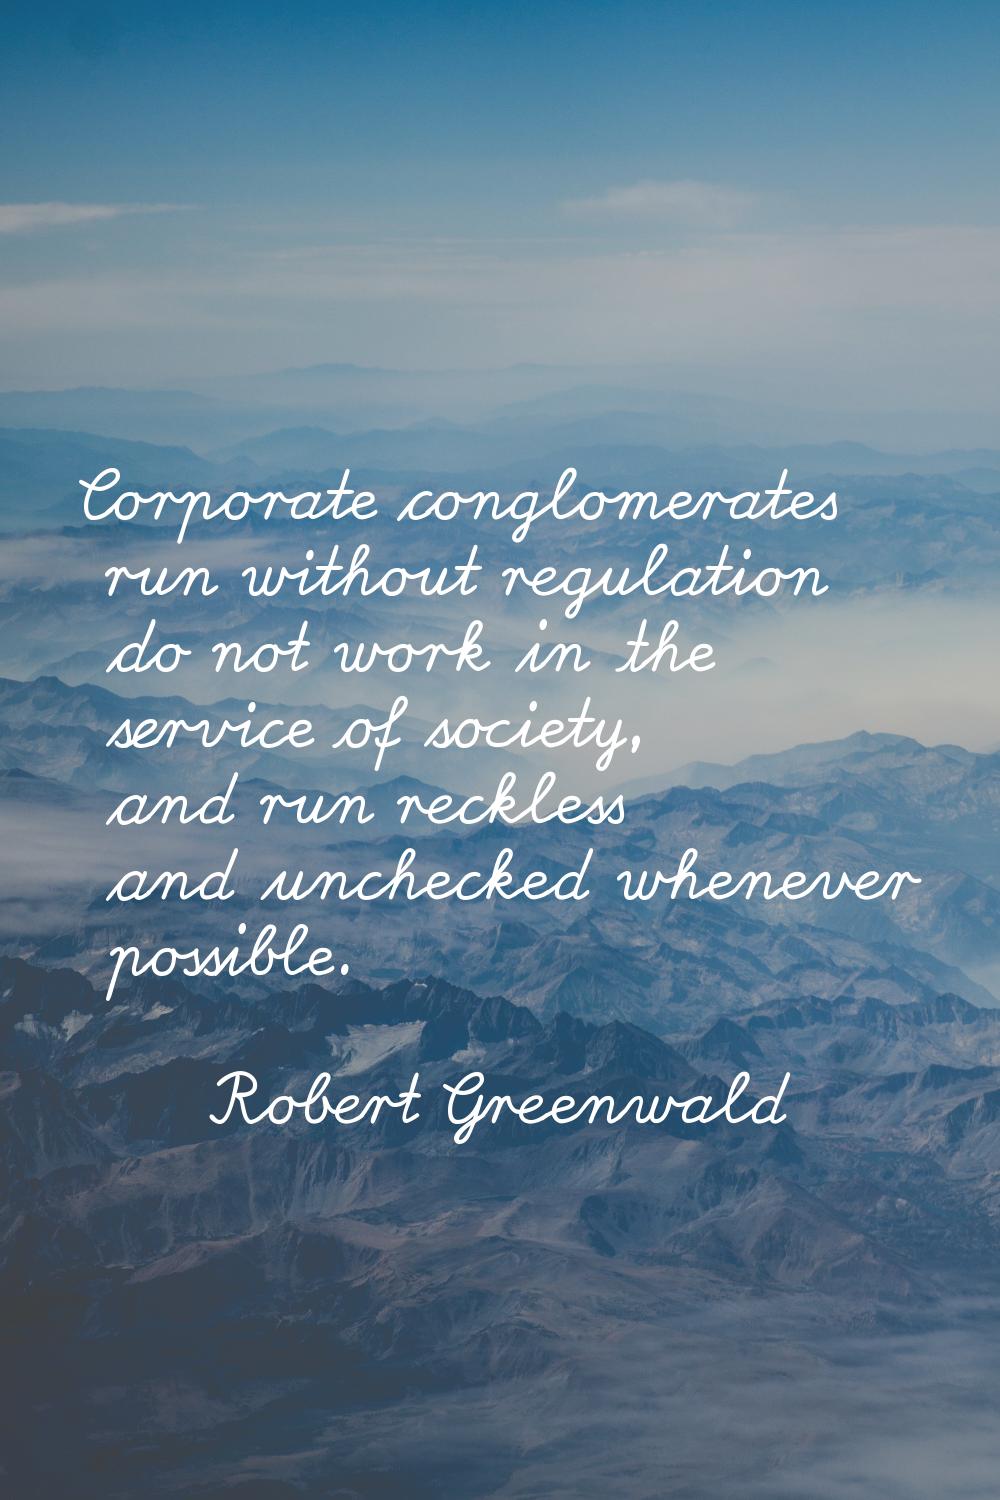 Corporate conglomerates run without regulation do not work in the service of society, and run reckl